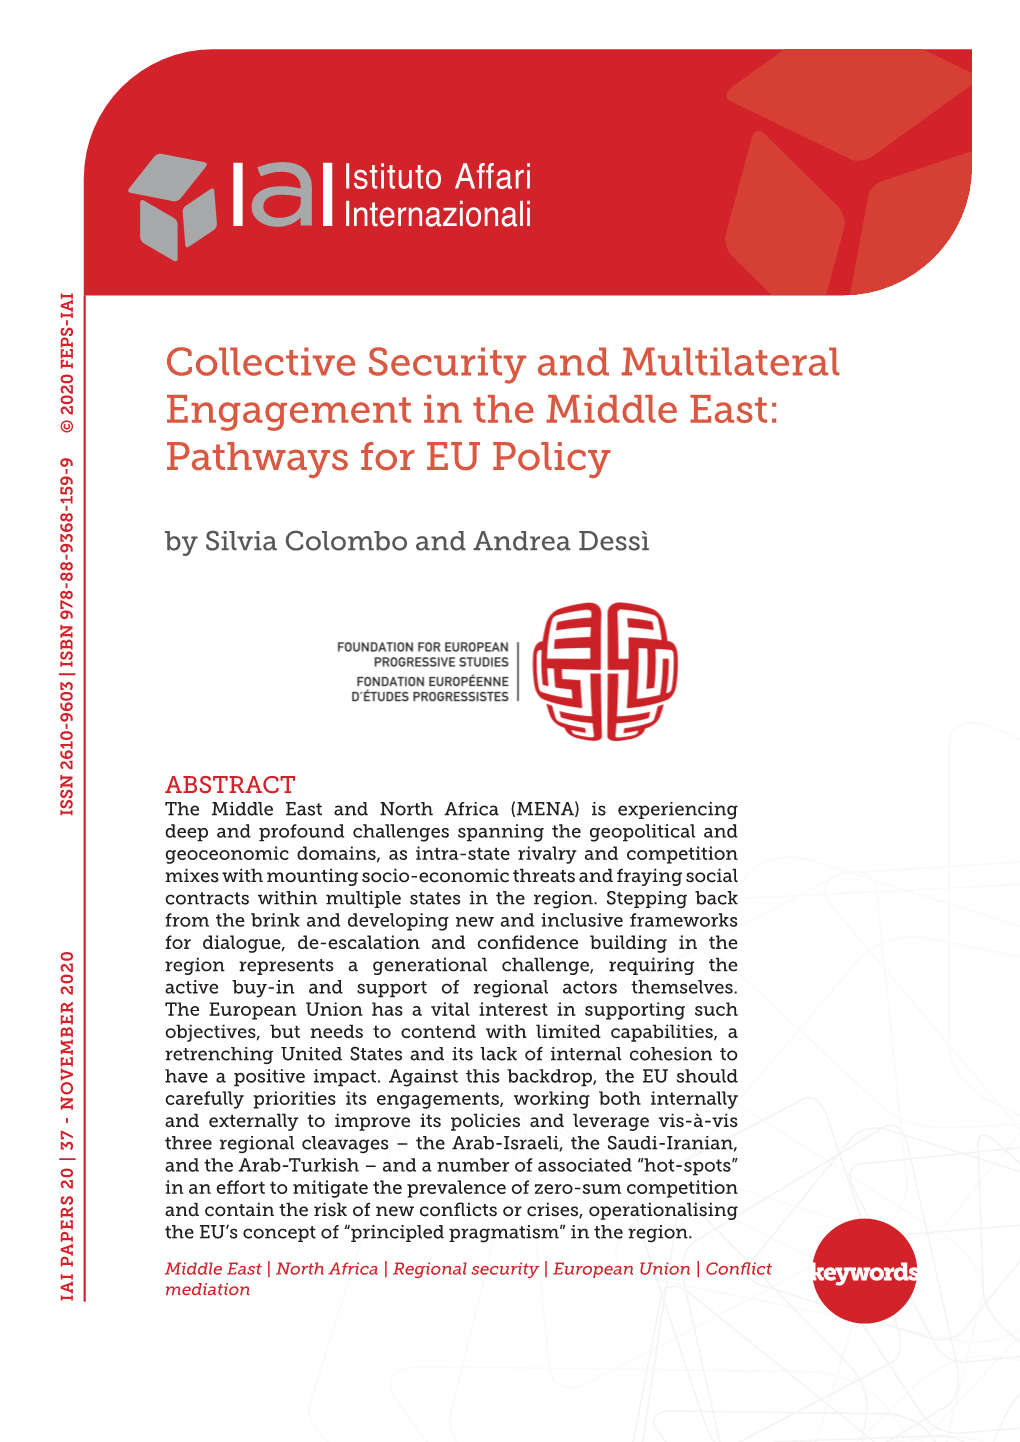 Collective Security and Multilateral Engagement in the Middle East